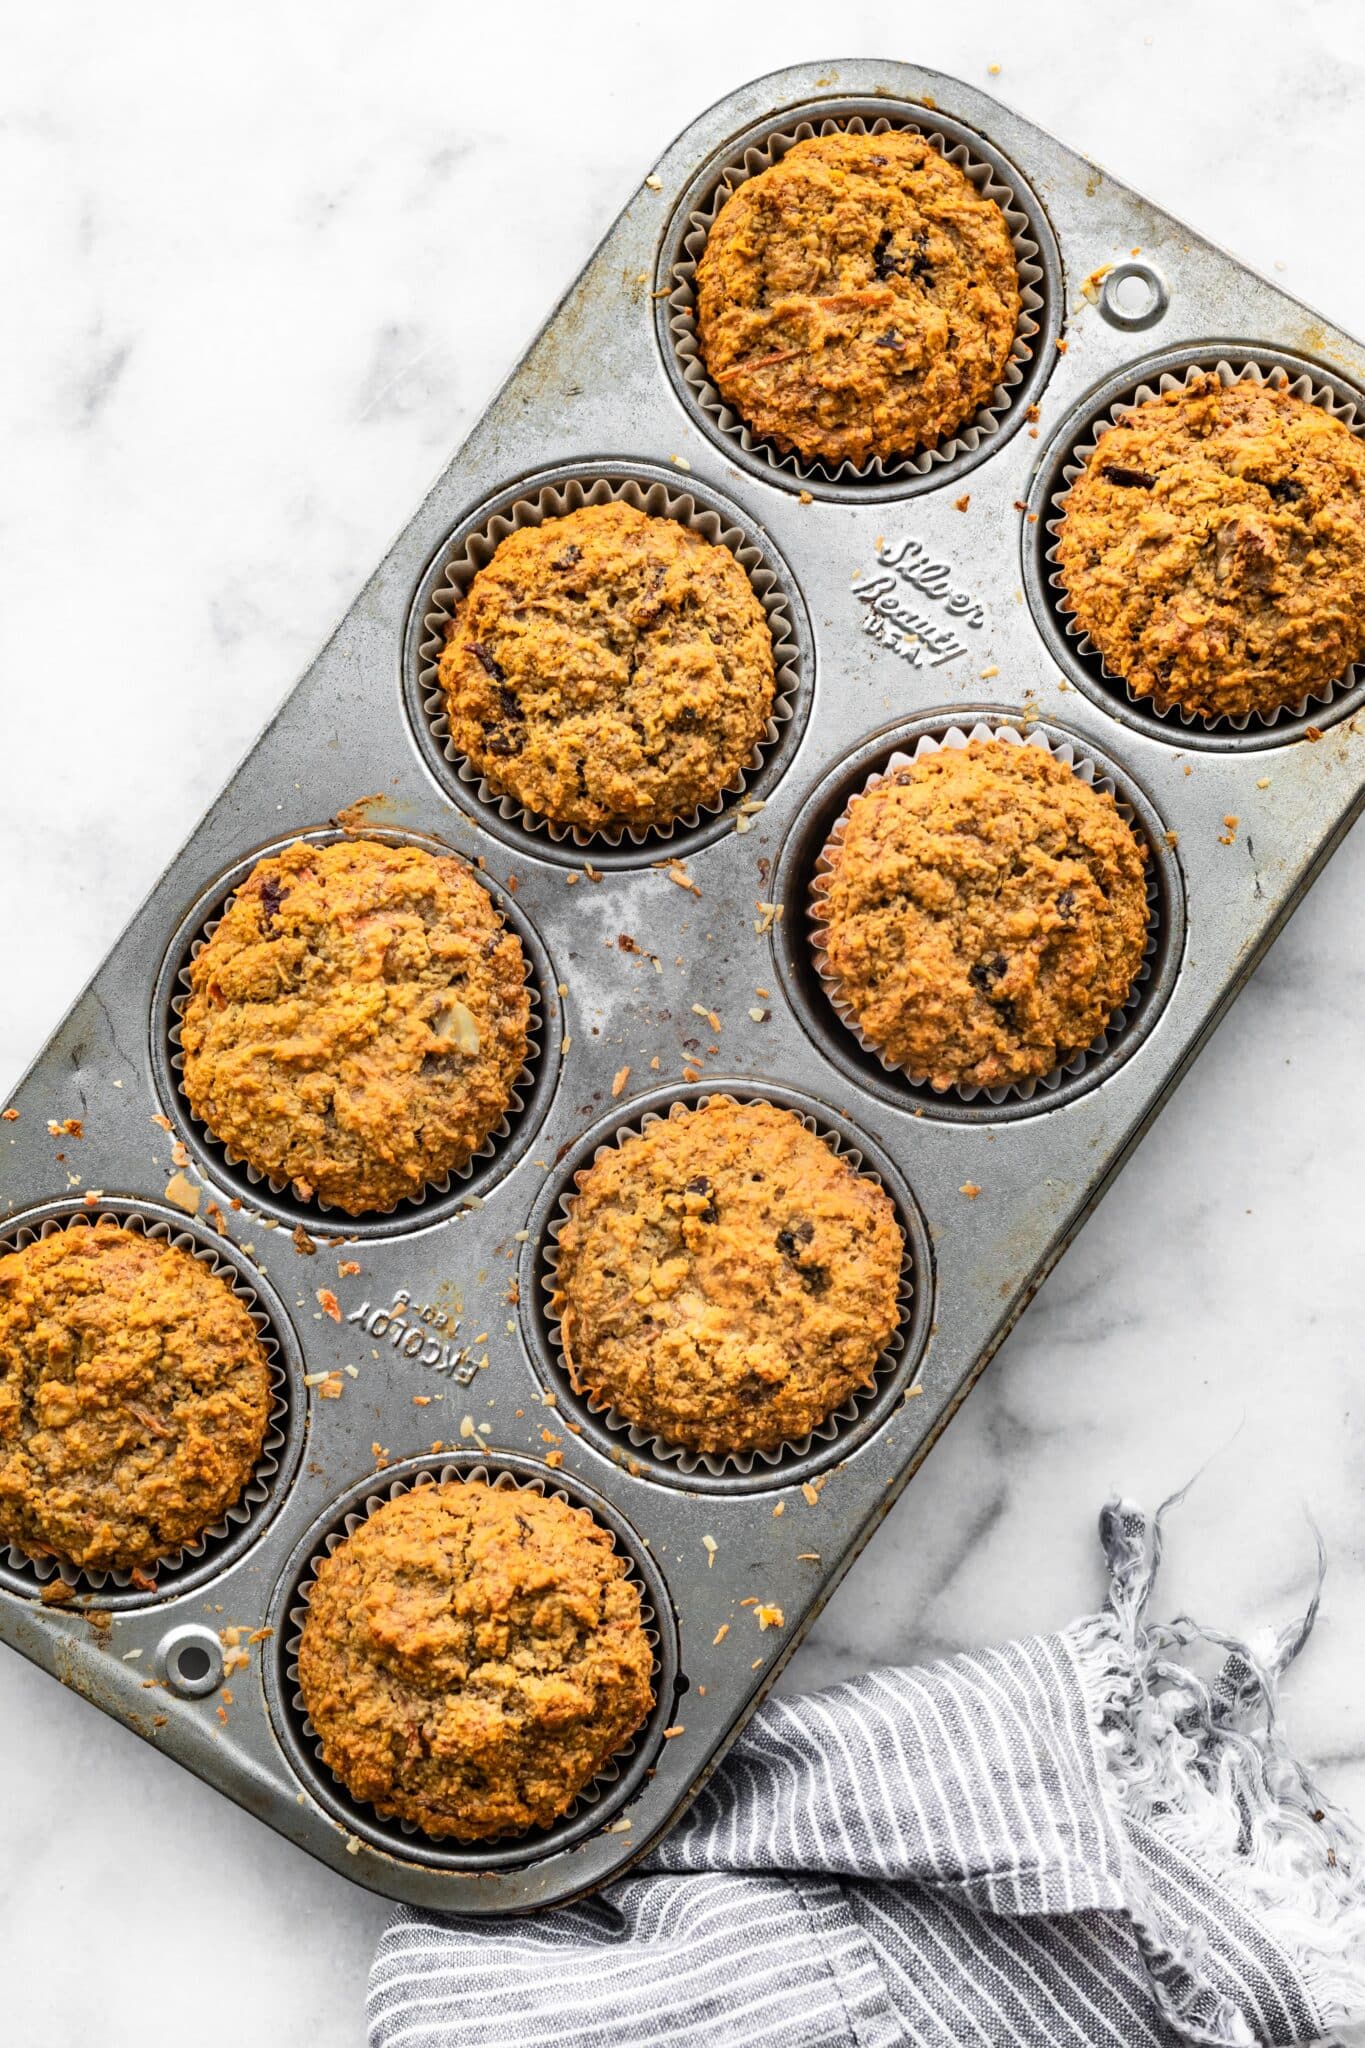 Eight baked gluten free carrot cake muffins in a metal muffin pan.